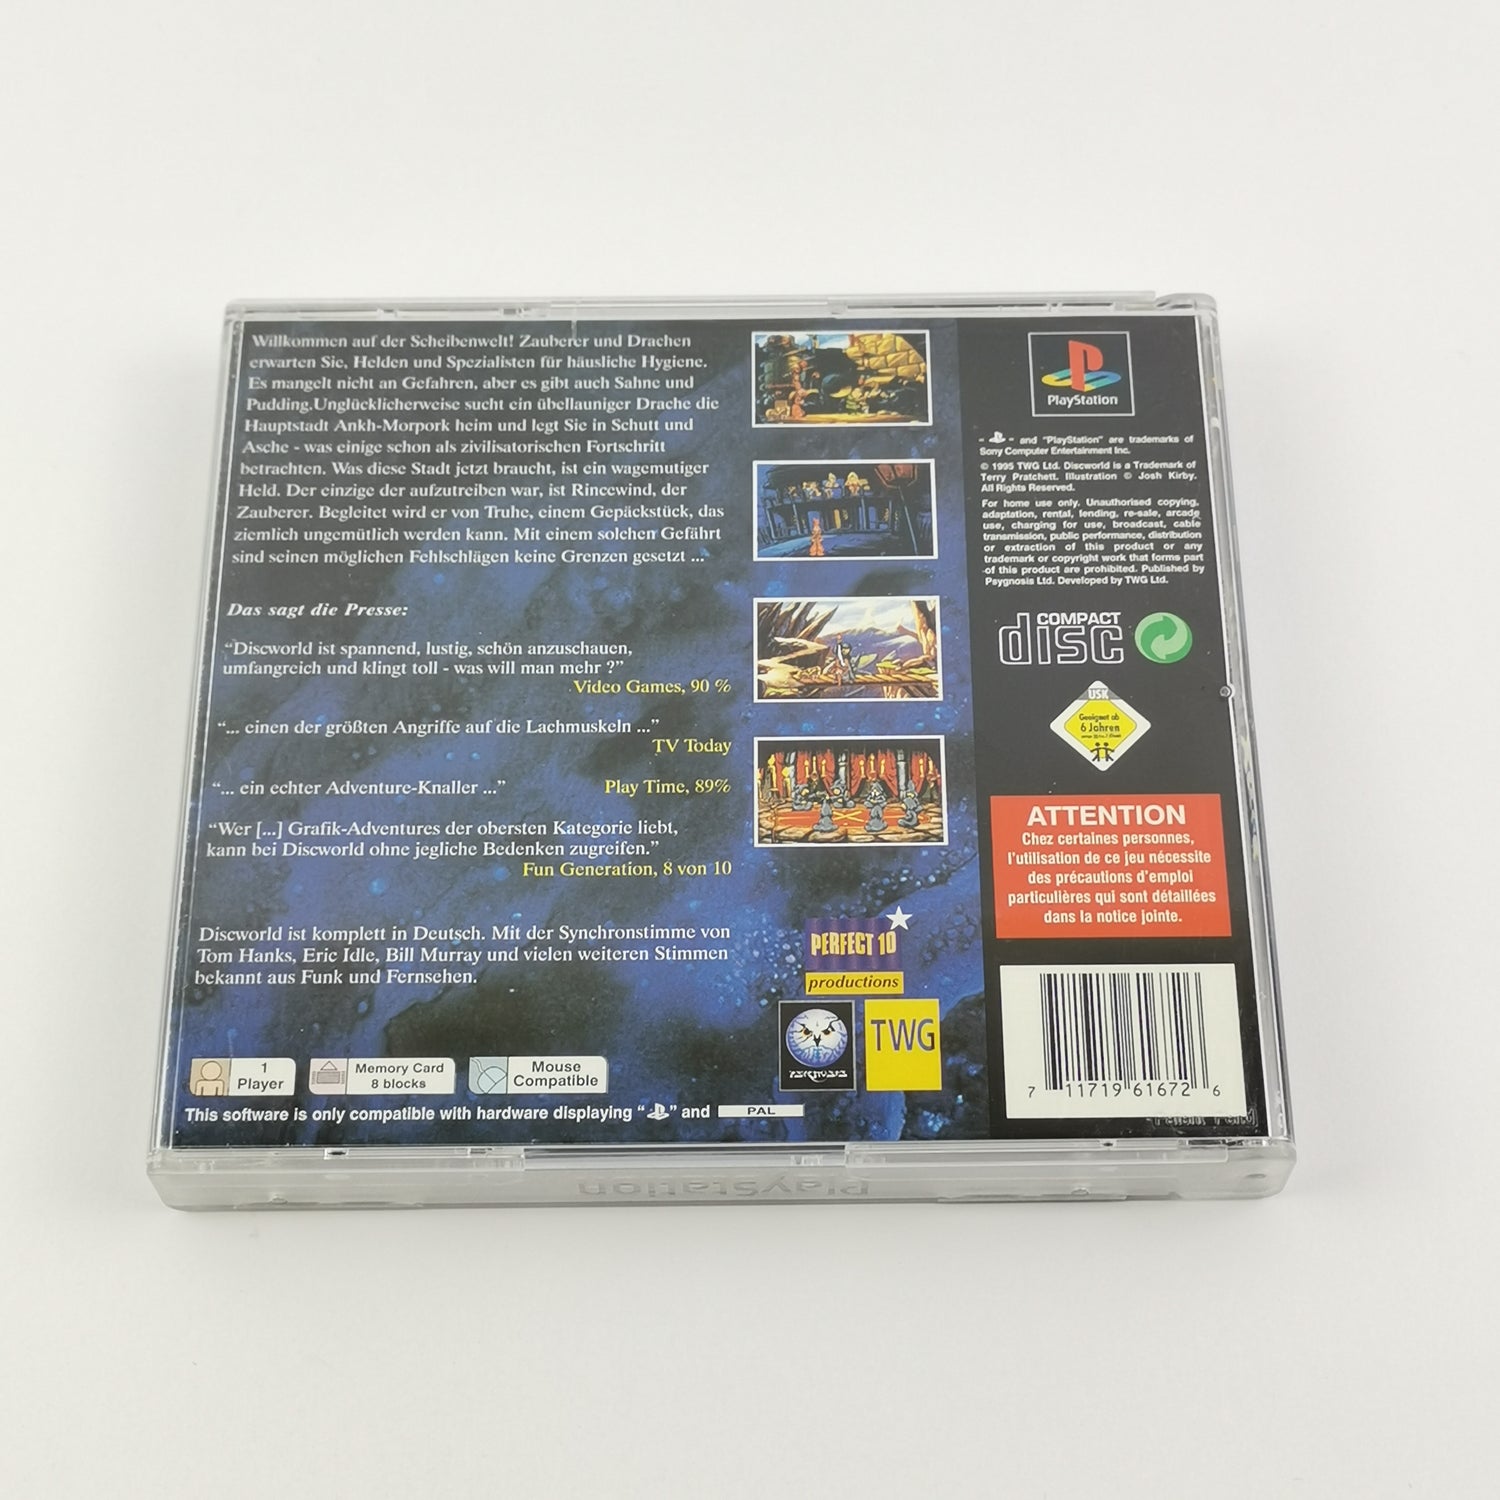 Sony Playstation 1 game: Terry Pratchett's Discworld - original packaging & instructions PAL PS1